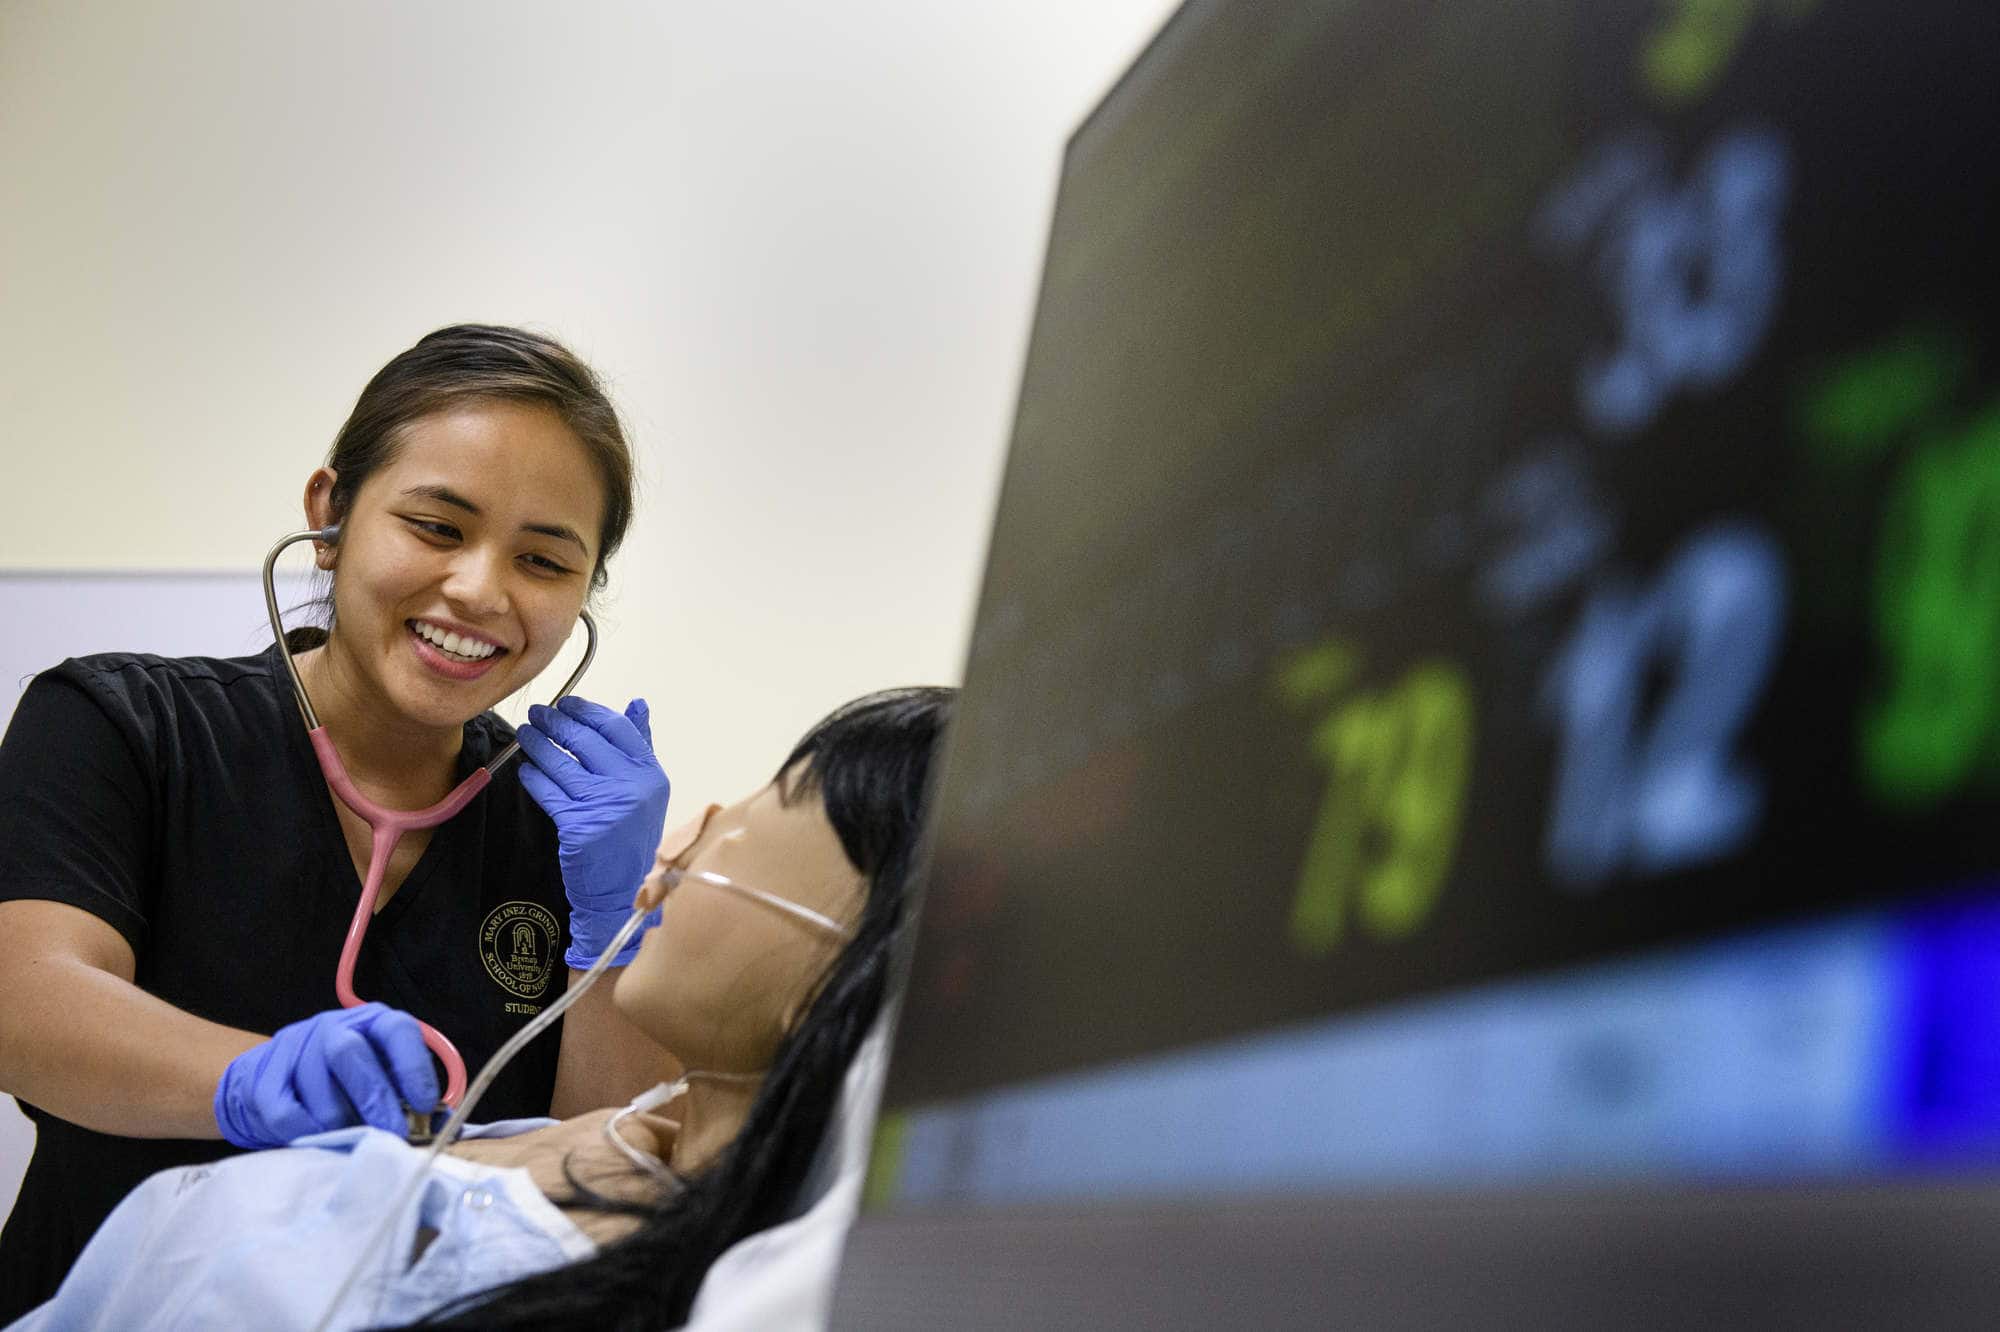 A nursing student works on a simulator with a monitor in the foreground